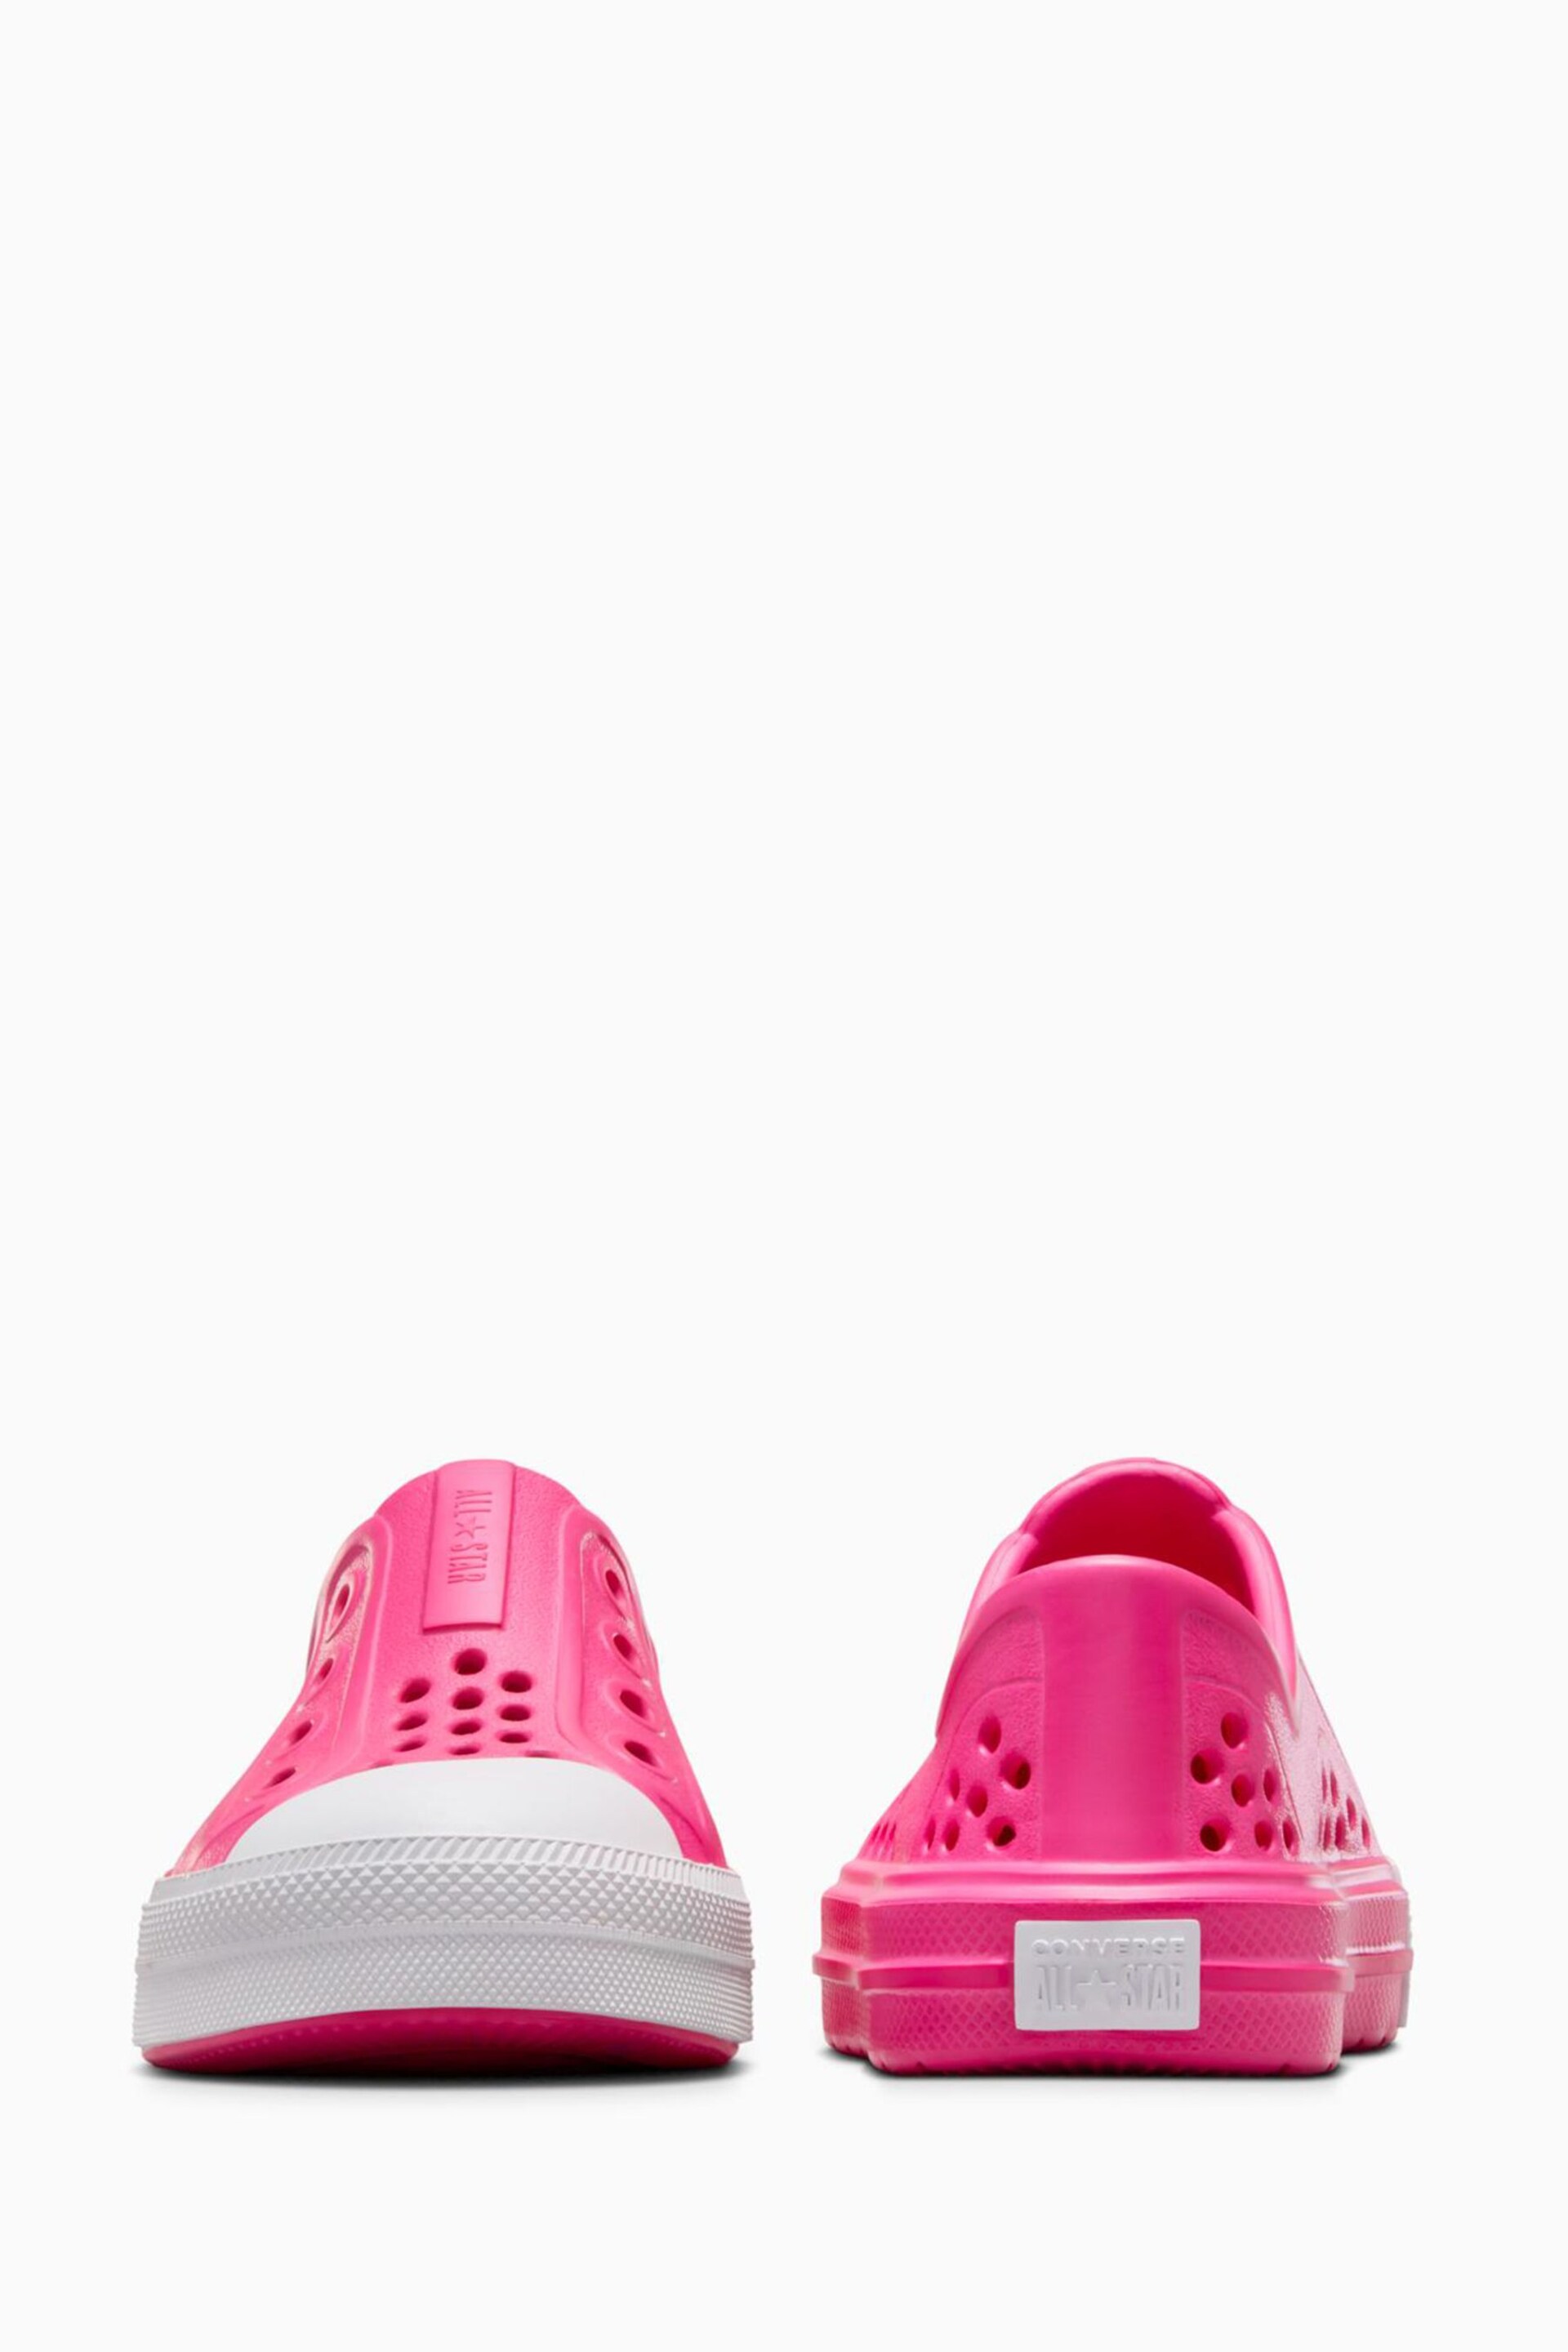 Converse Pink Play Lite Toddler Sandals - Image 6 of 8